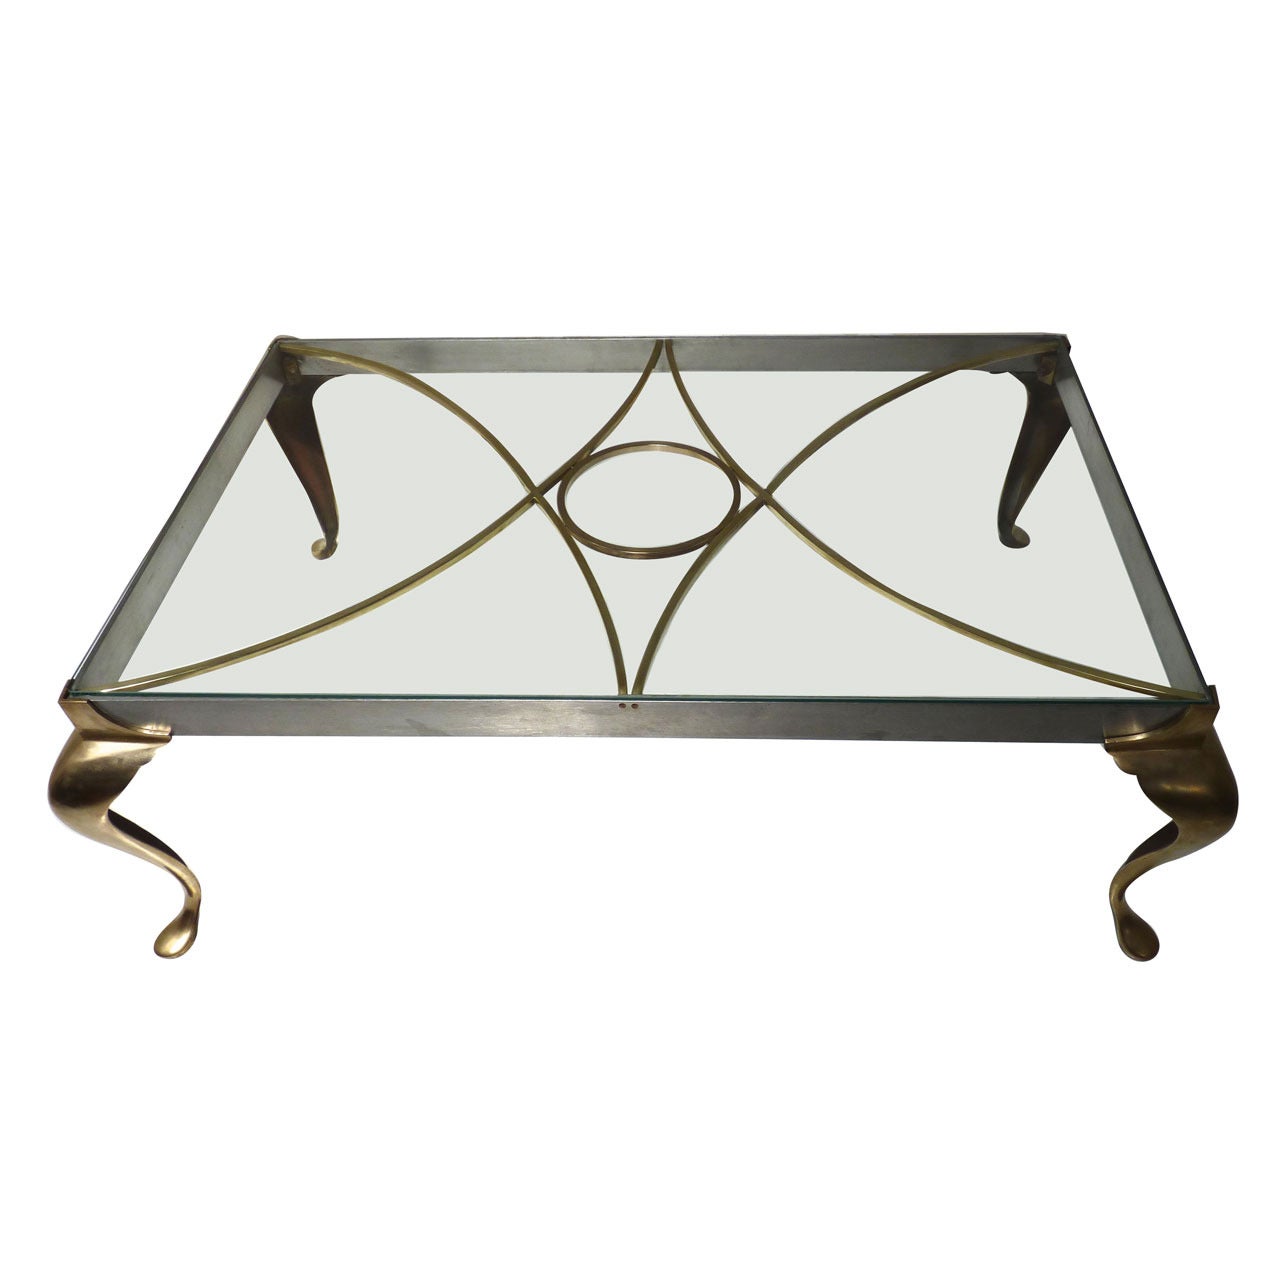 Brass & Stainless Cabriolet Leg Cocktail Table by Chapman